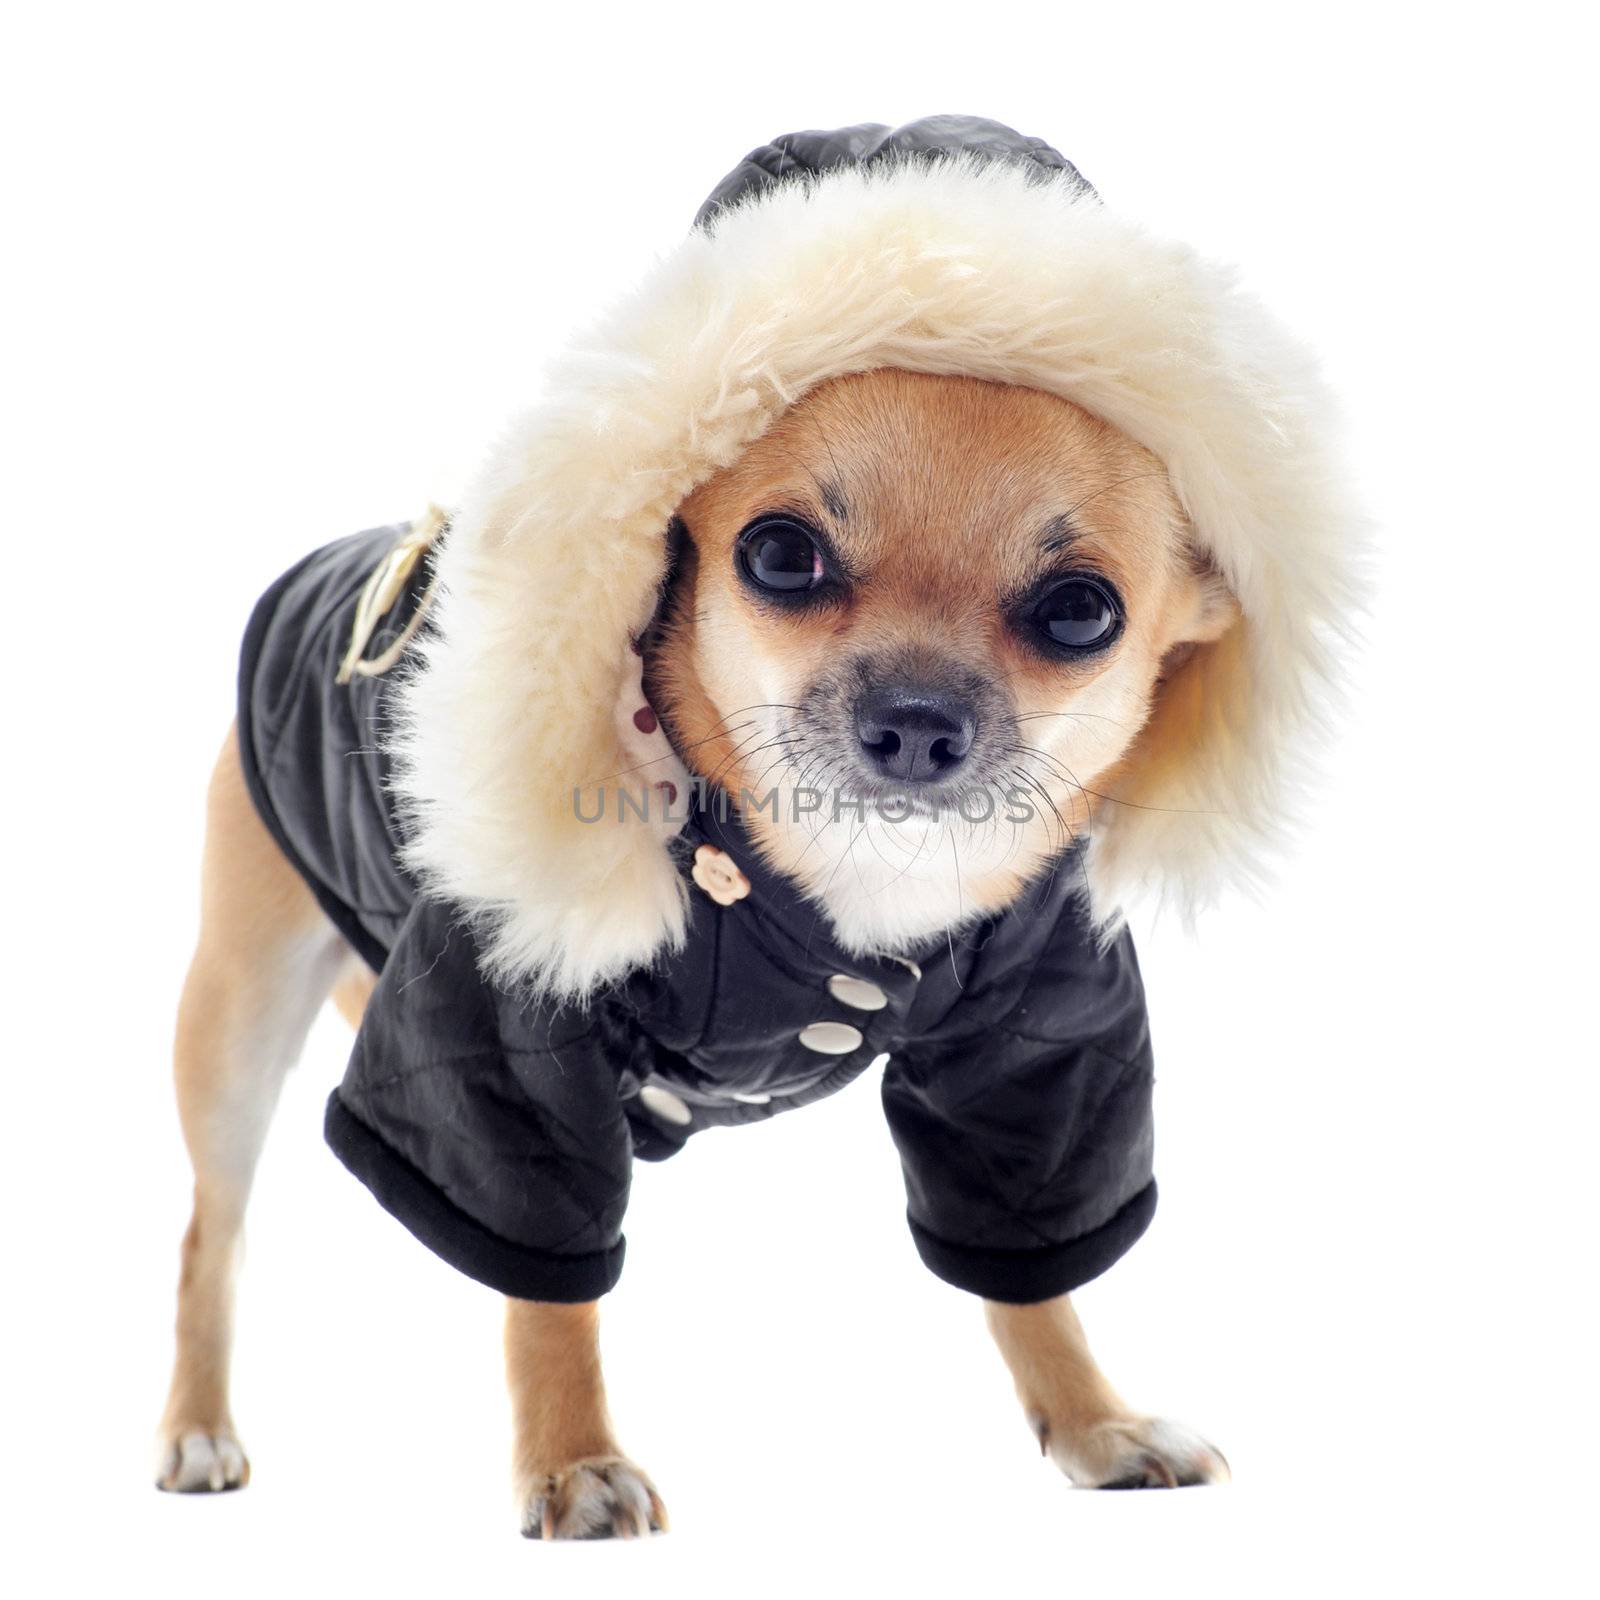 chihuahua dressed in front of white background